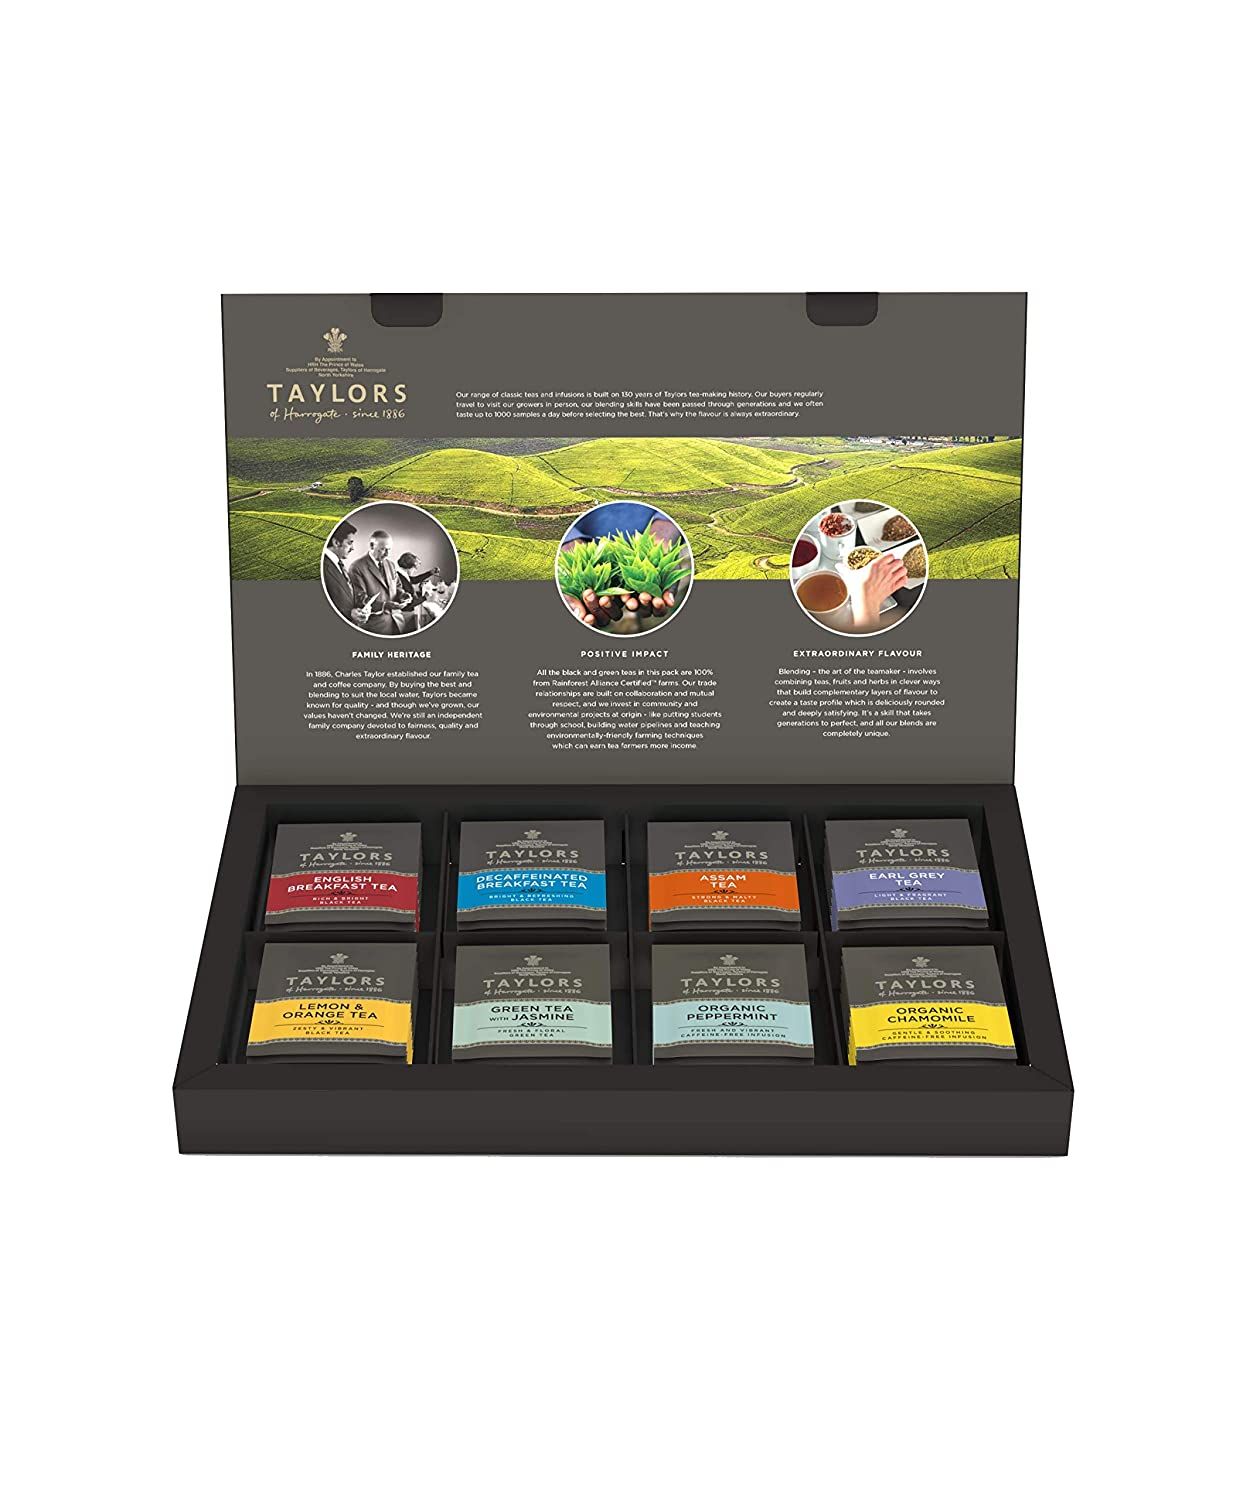 Taylors of Harrogate Classic Tea Variety Box, 48 Count (Pack of 1) | Amazon (US)